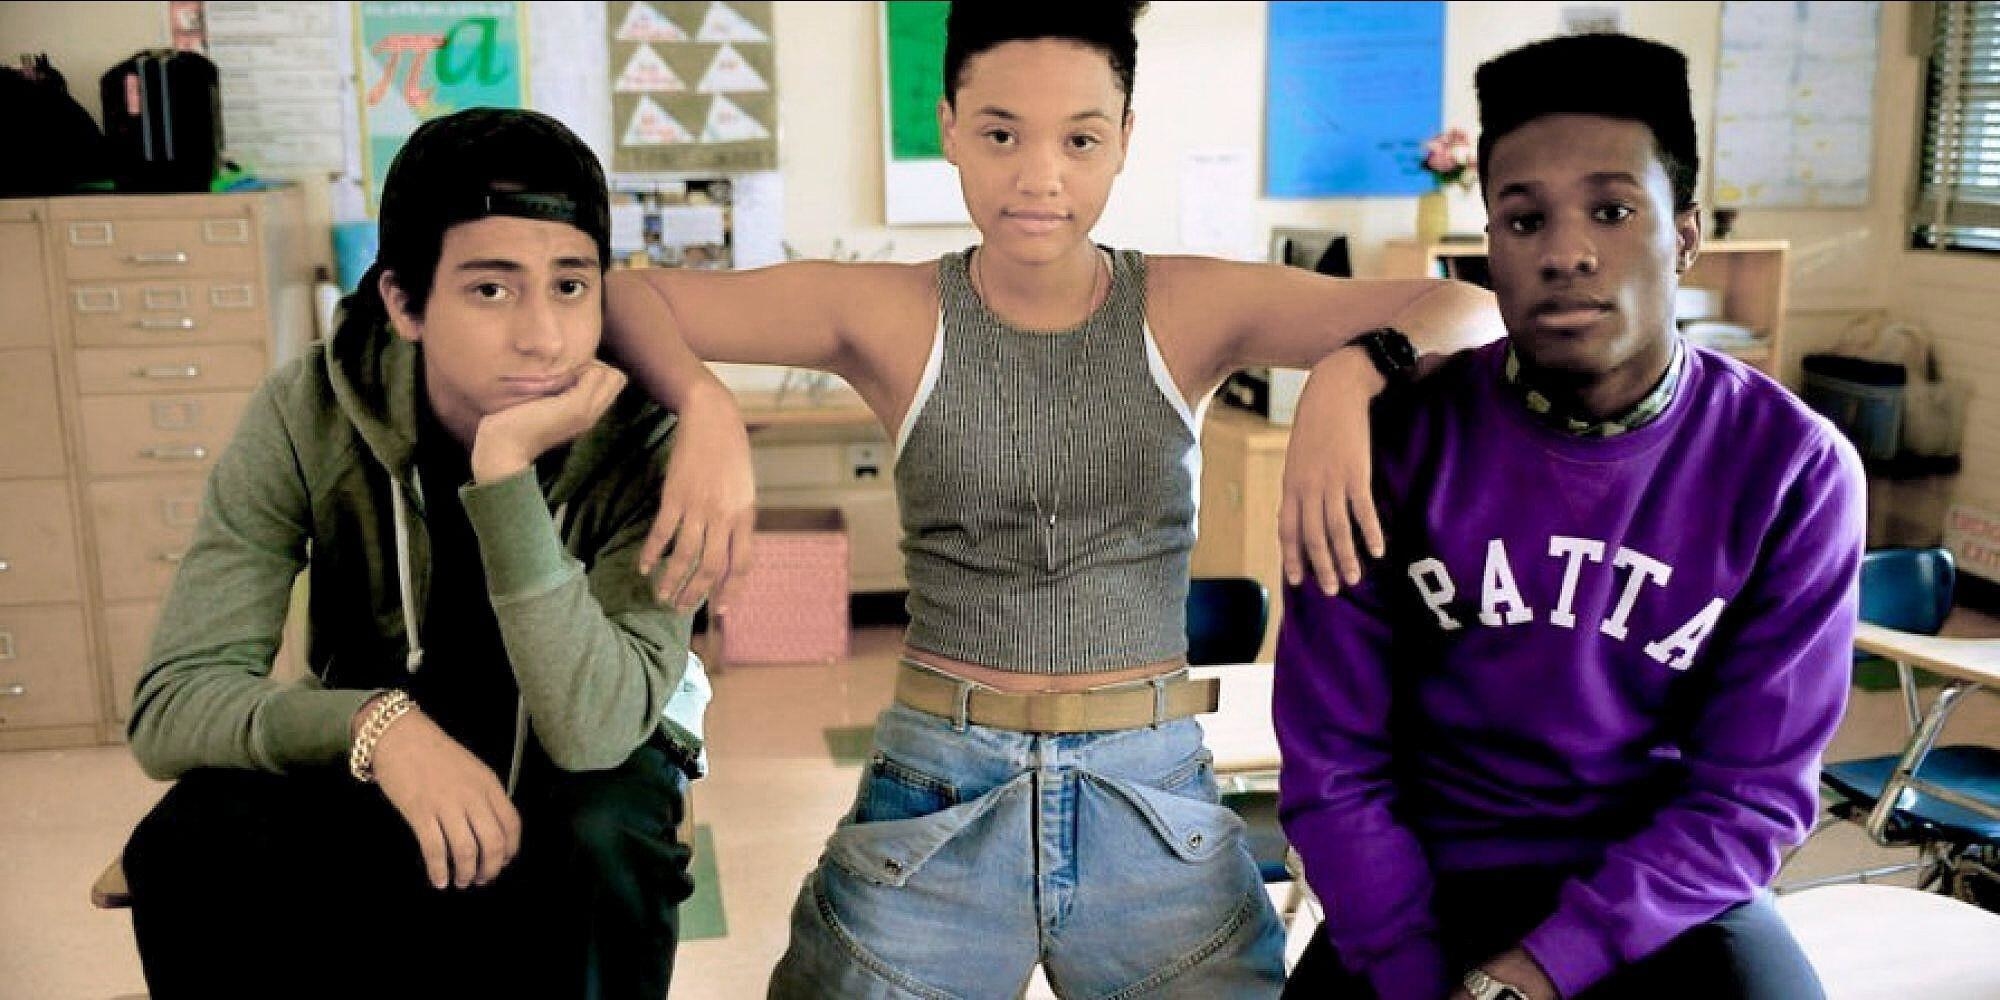 A trio of high school students pose in a classroom